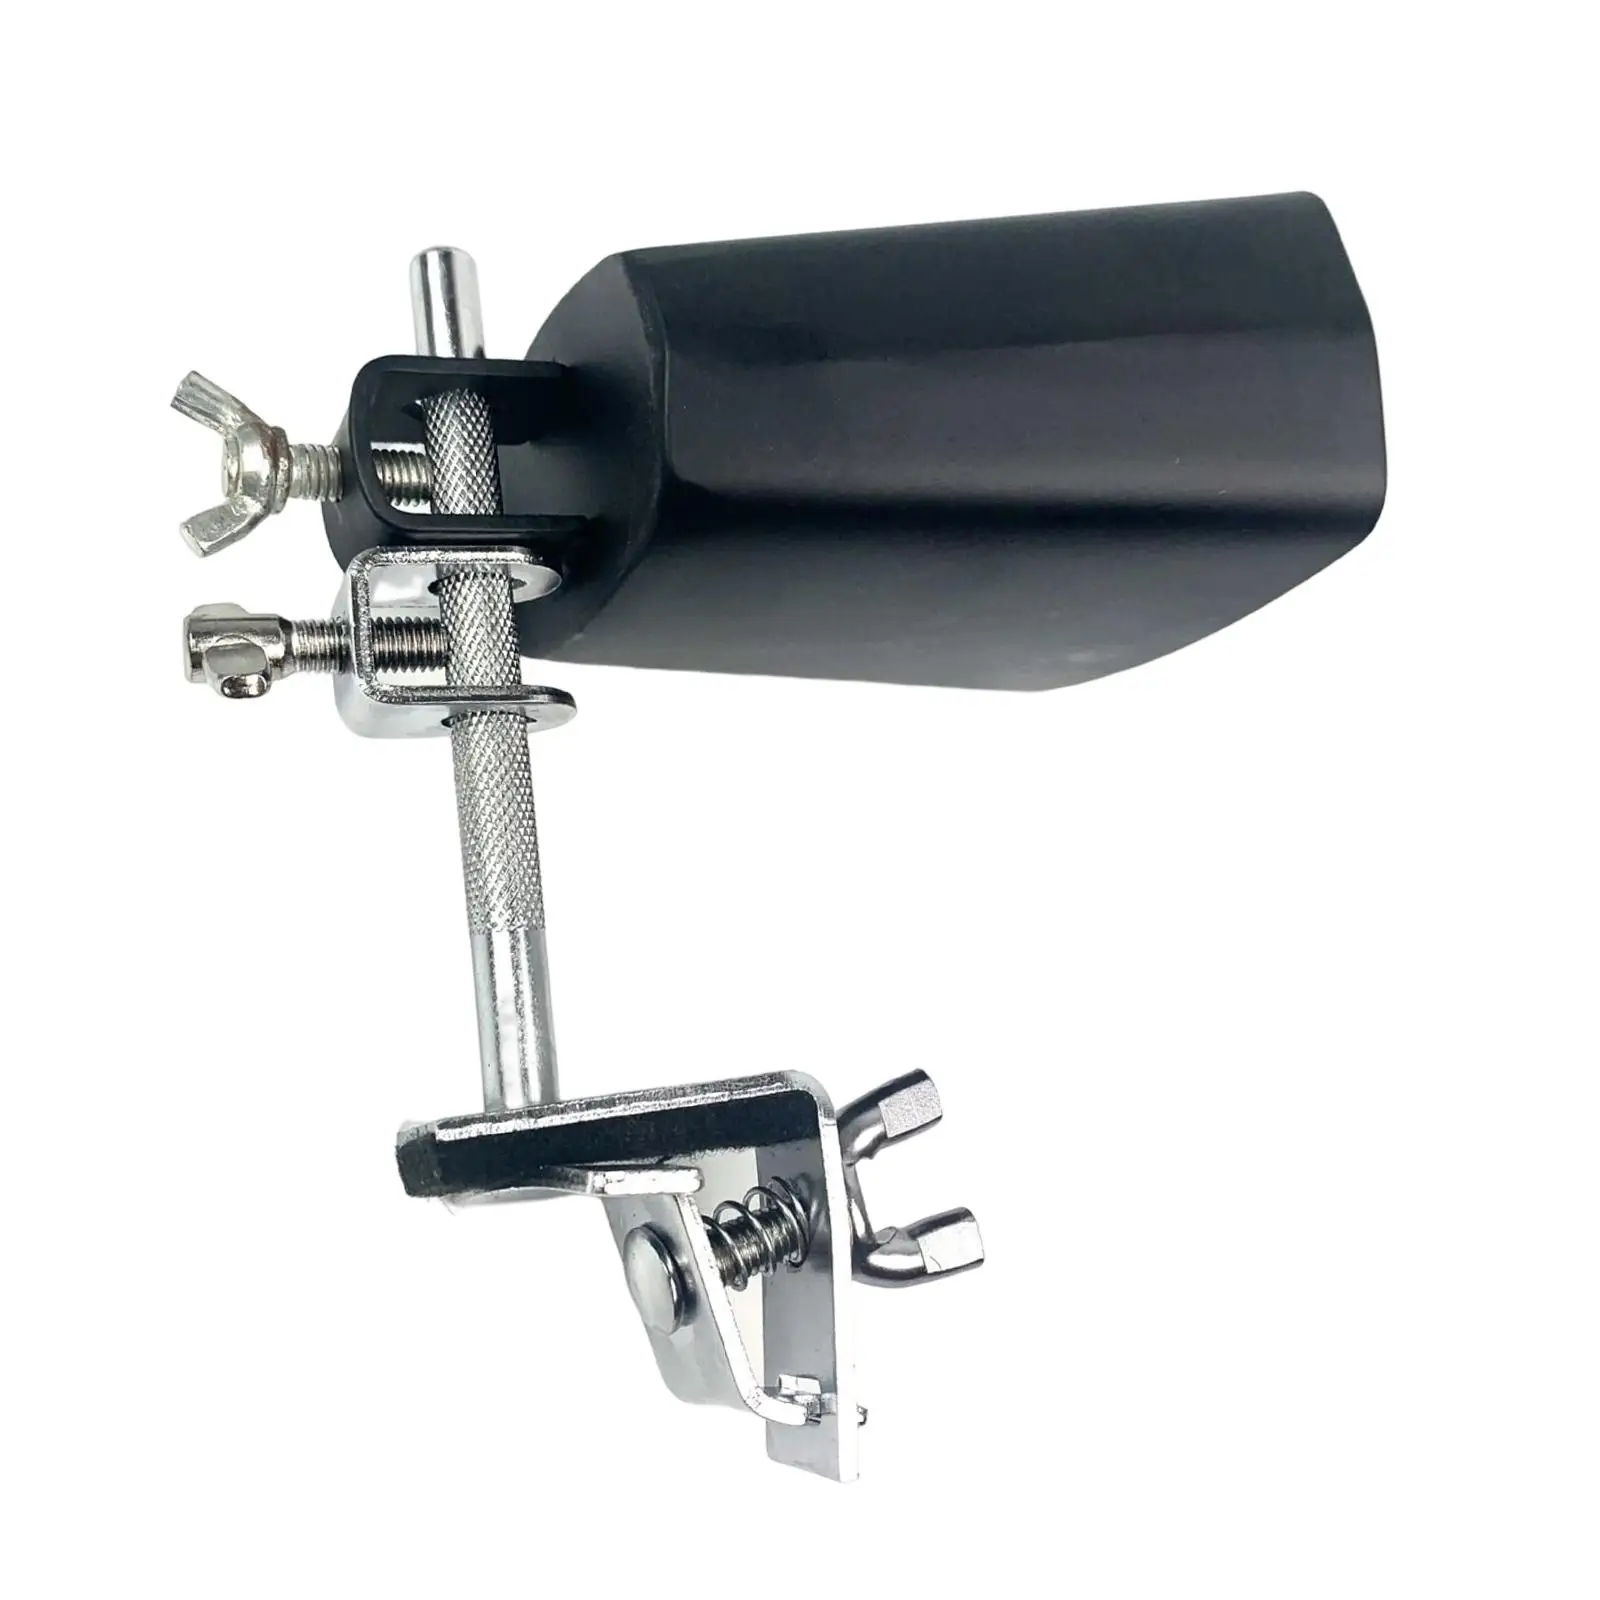 Metal Cowbell Clamp Holder with Cowbell Percussion Instrument Noise Maker